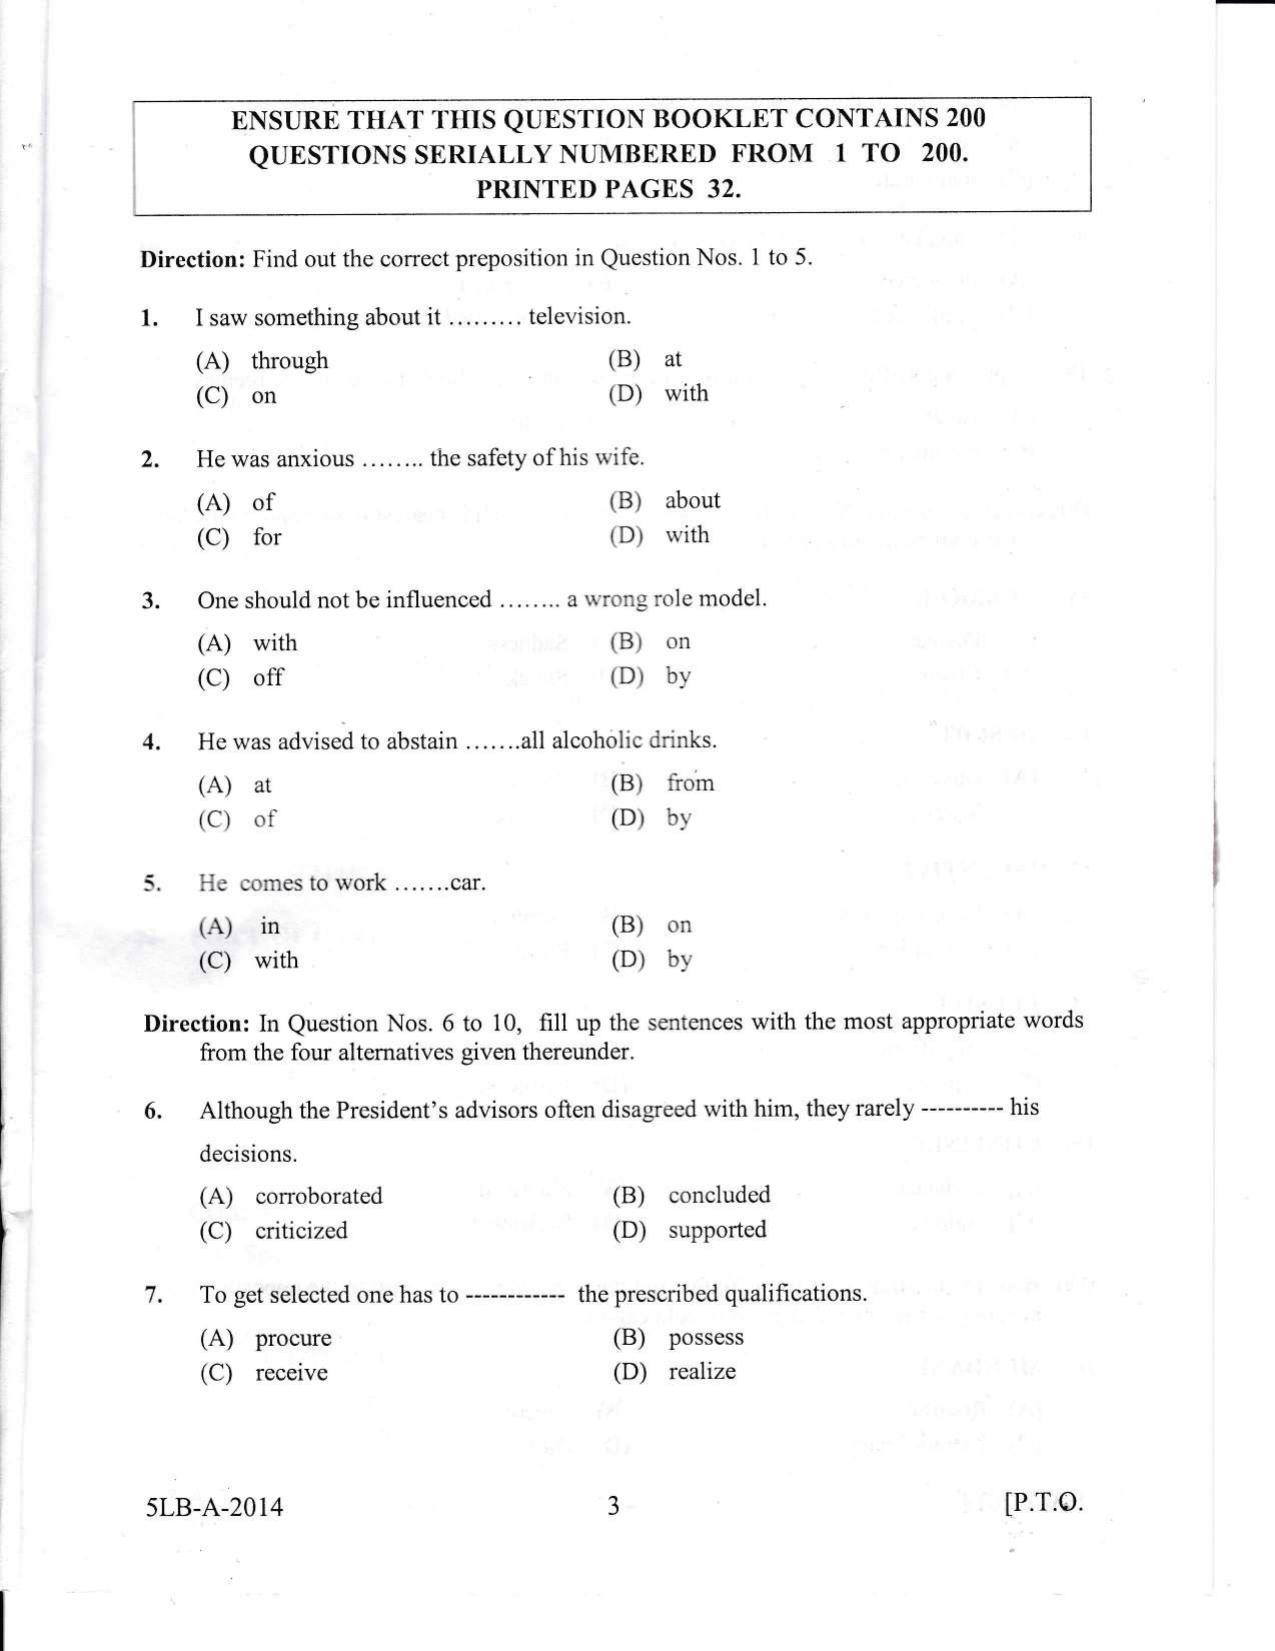 KLEE 5 Year LLB Exam 2014 Question Paper - Page 3